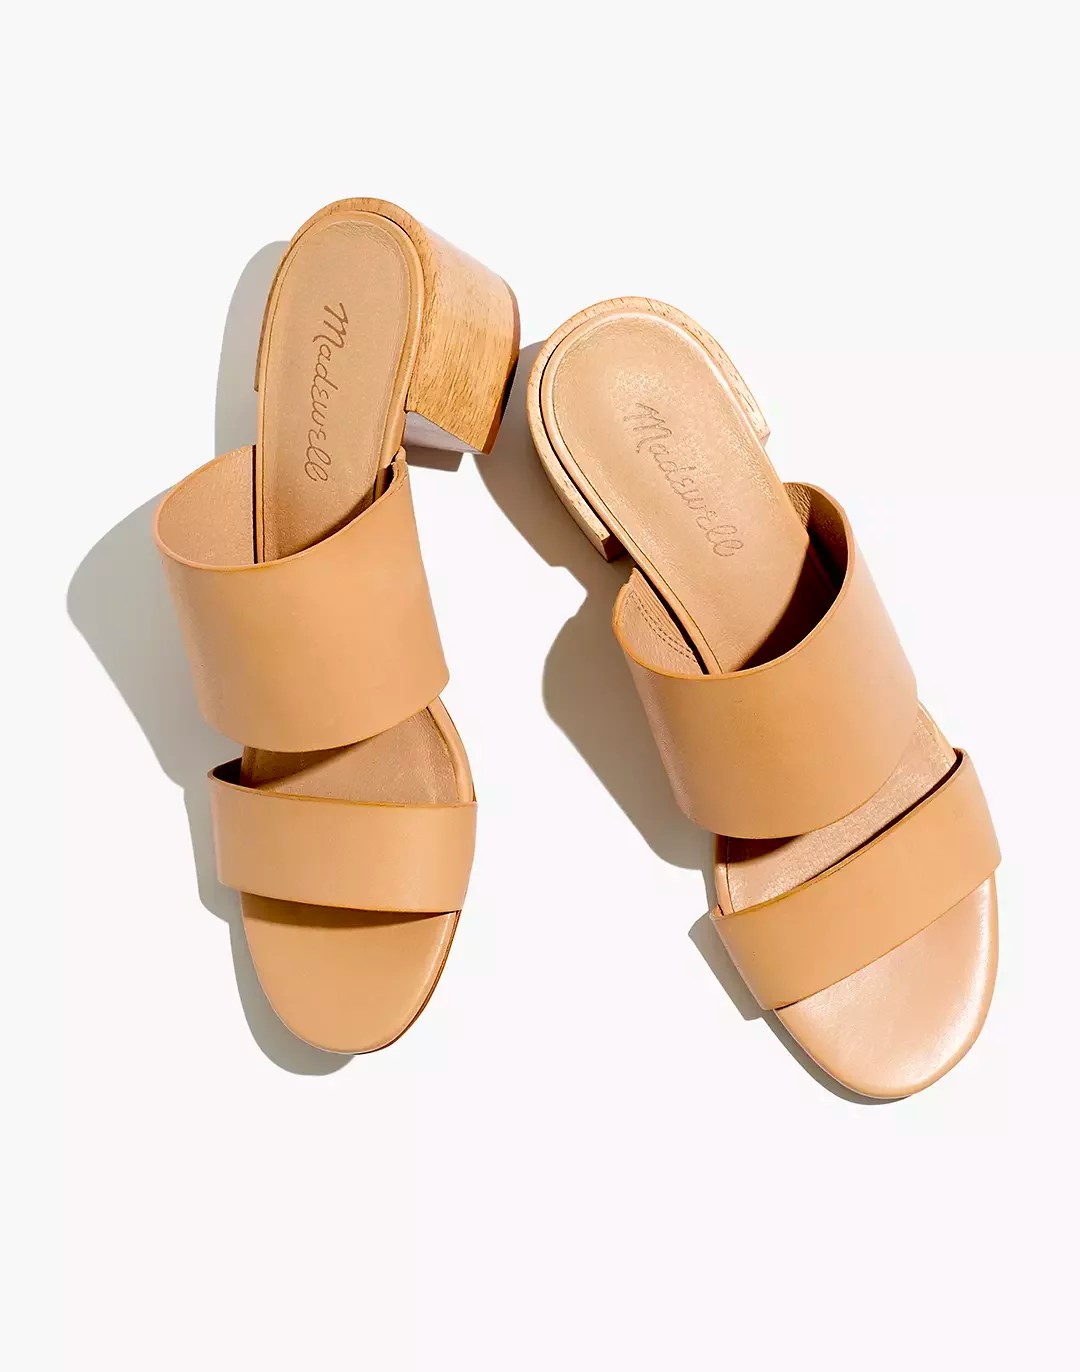 Madewell The Kiera Mule Sandal, heels with arch support